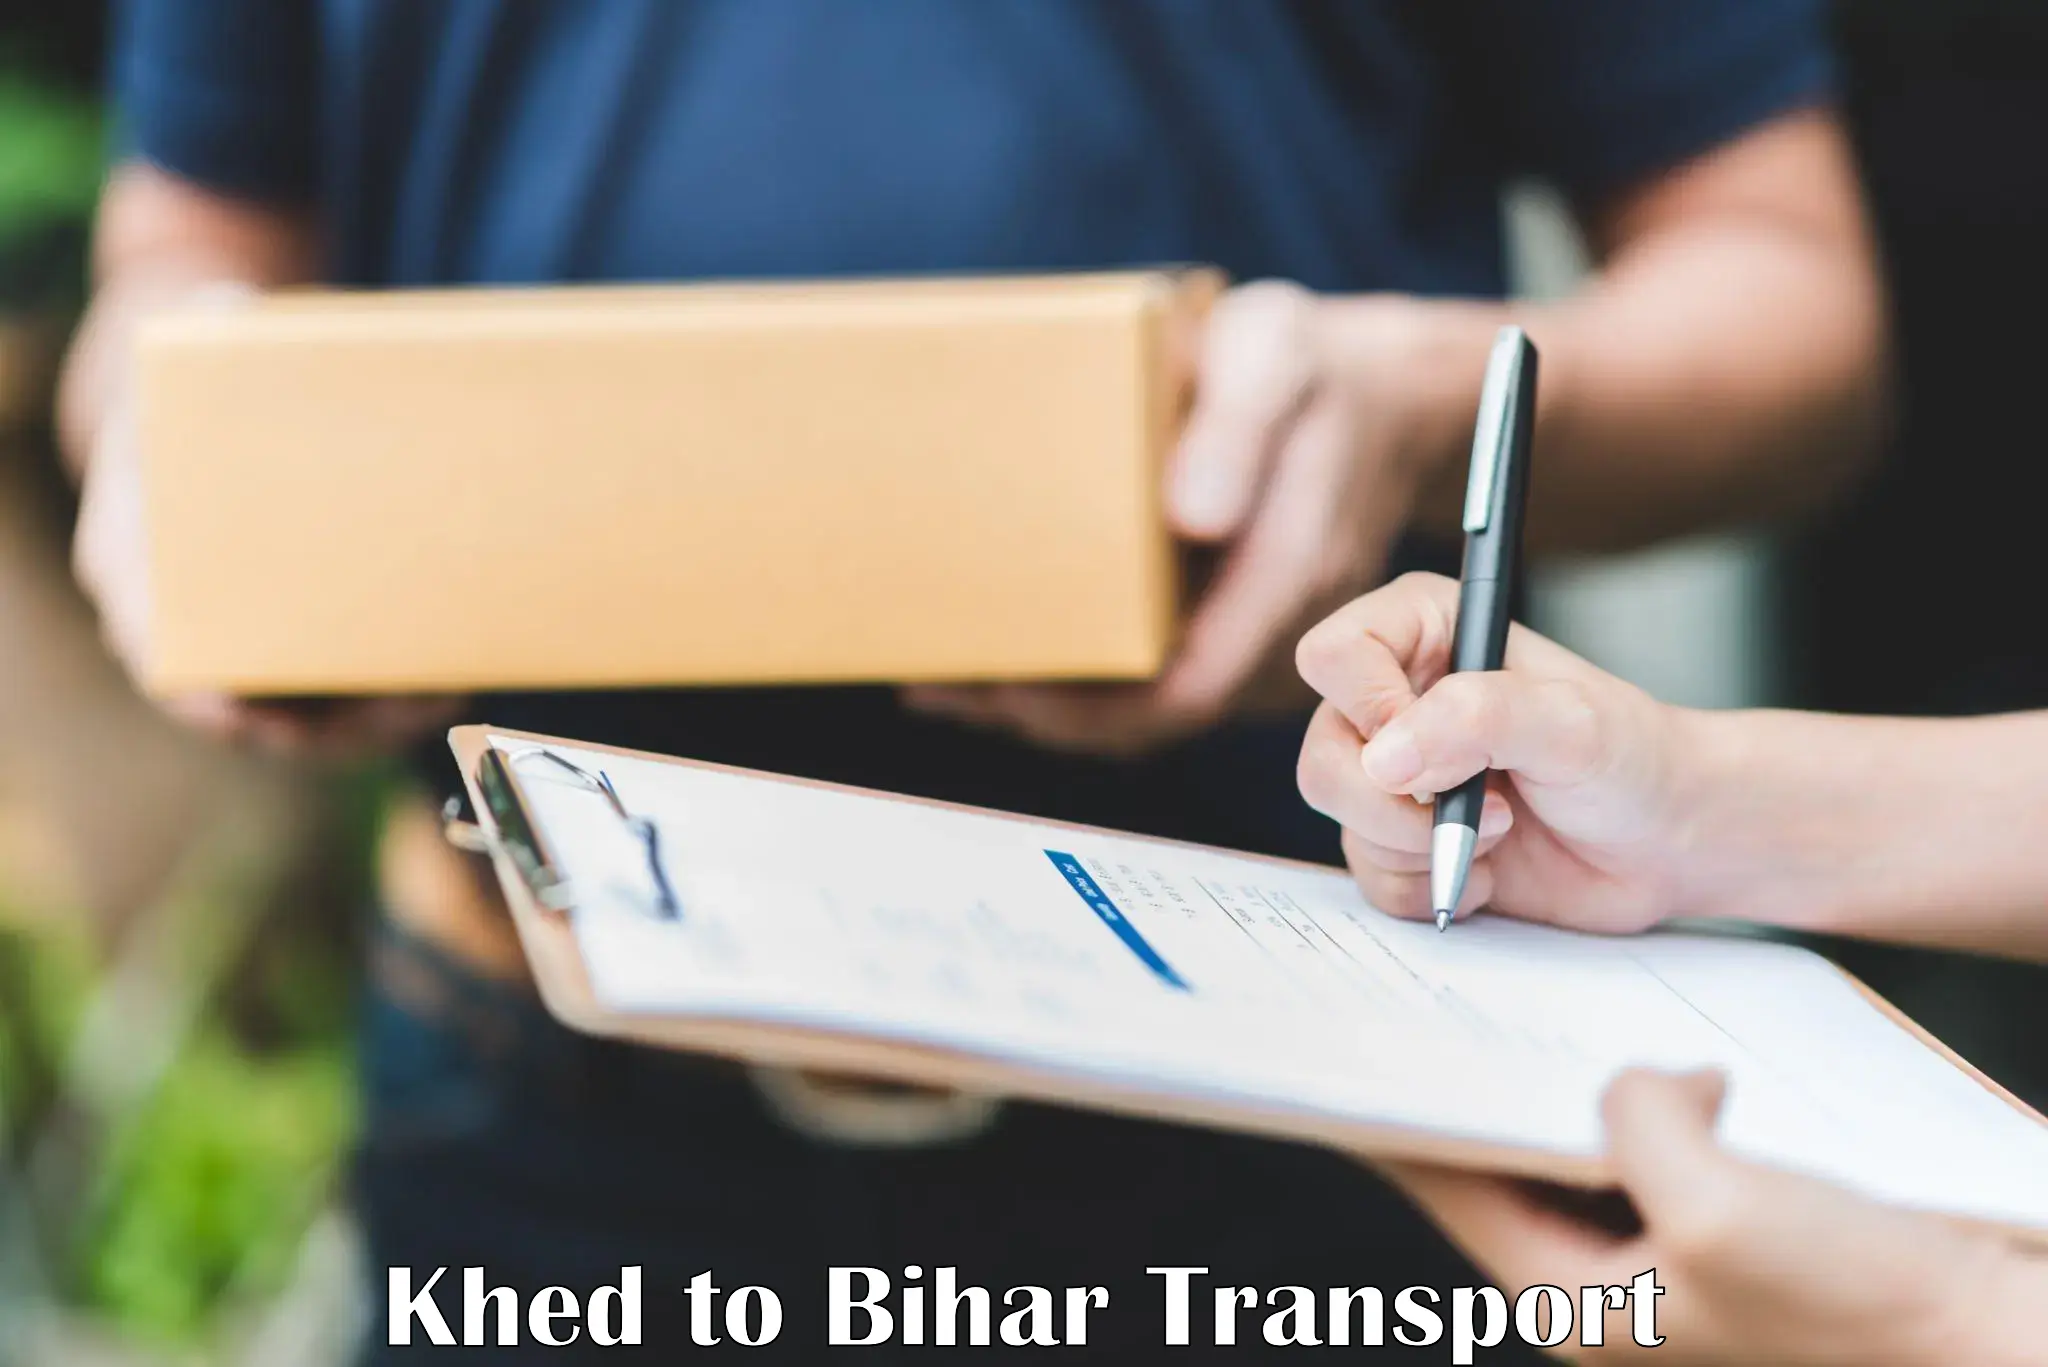 Two wheeler transport services Khed to Marhowrah